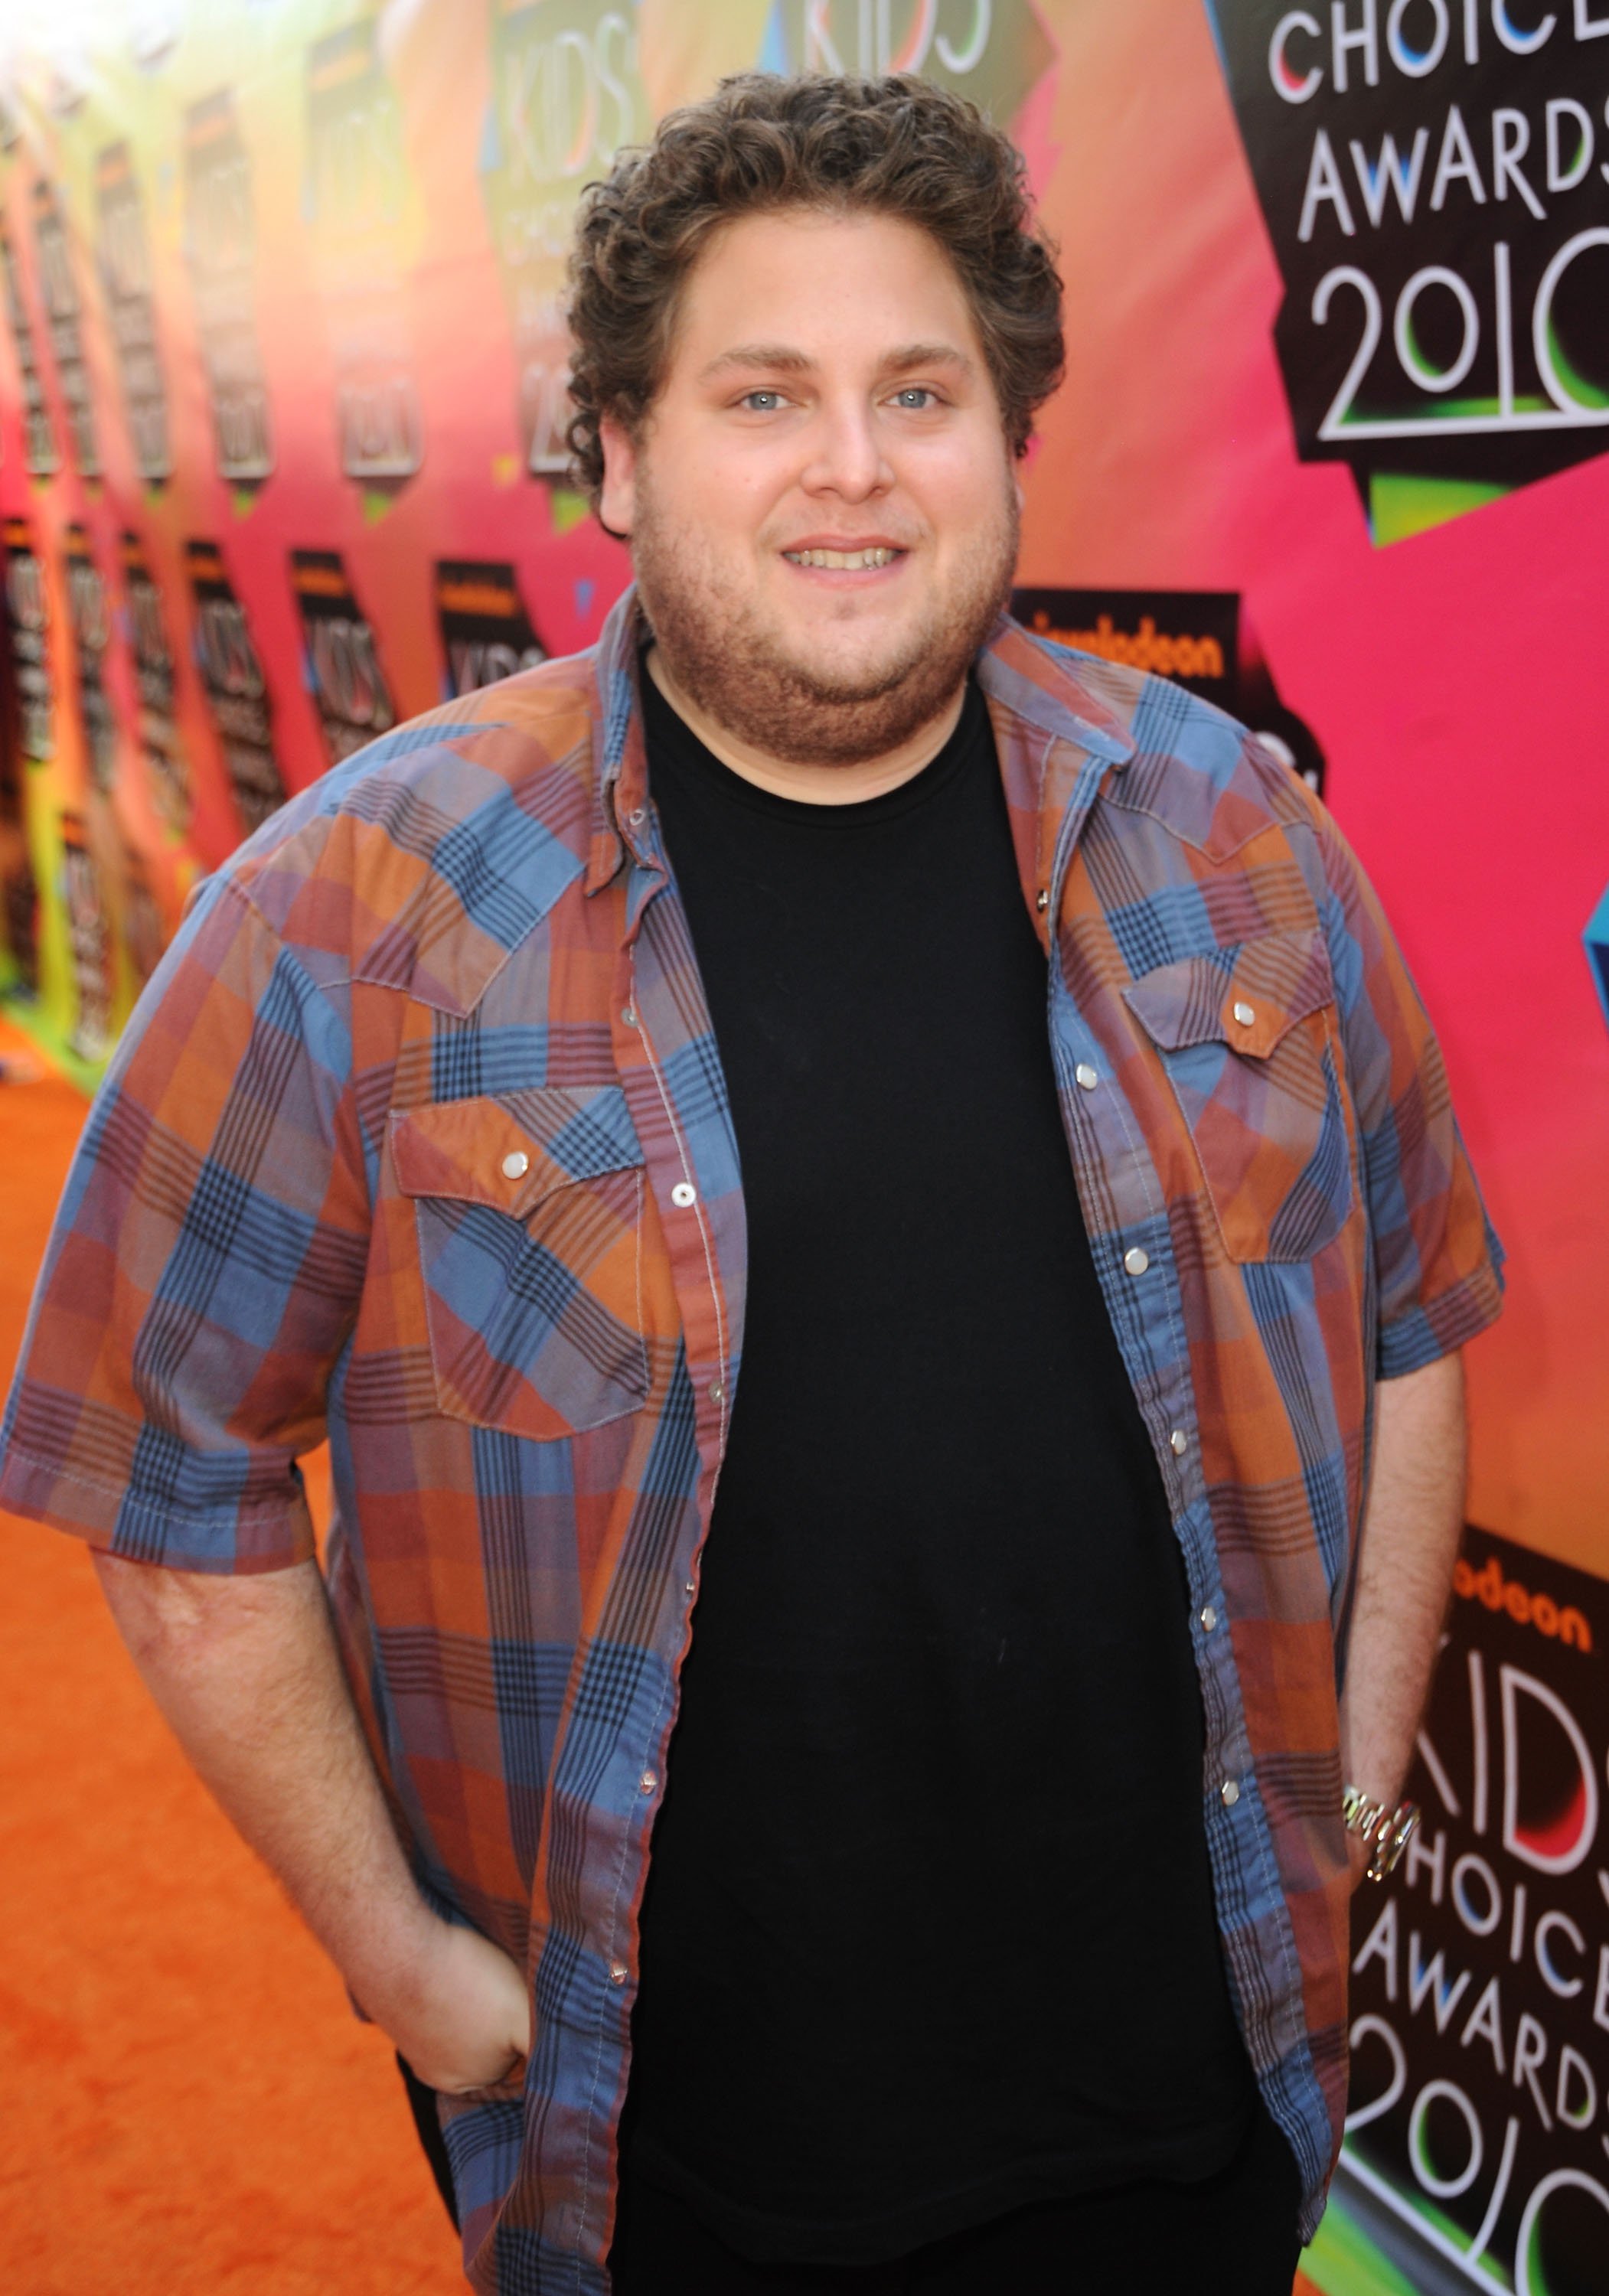 ViralityToday - Jonah Hill Reveals How He Lost So Much Weight